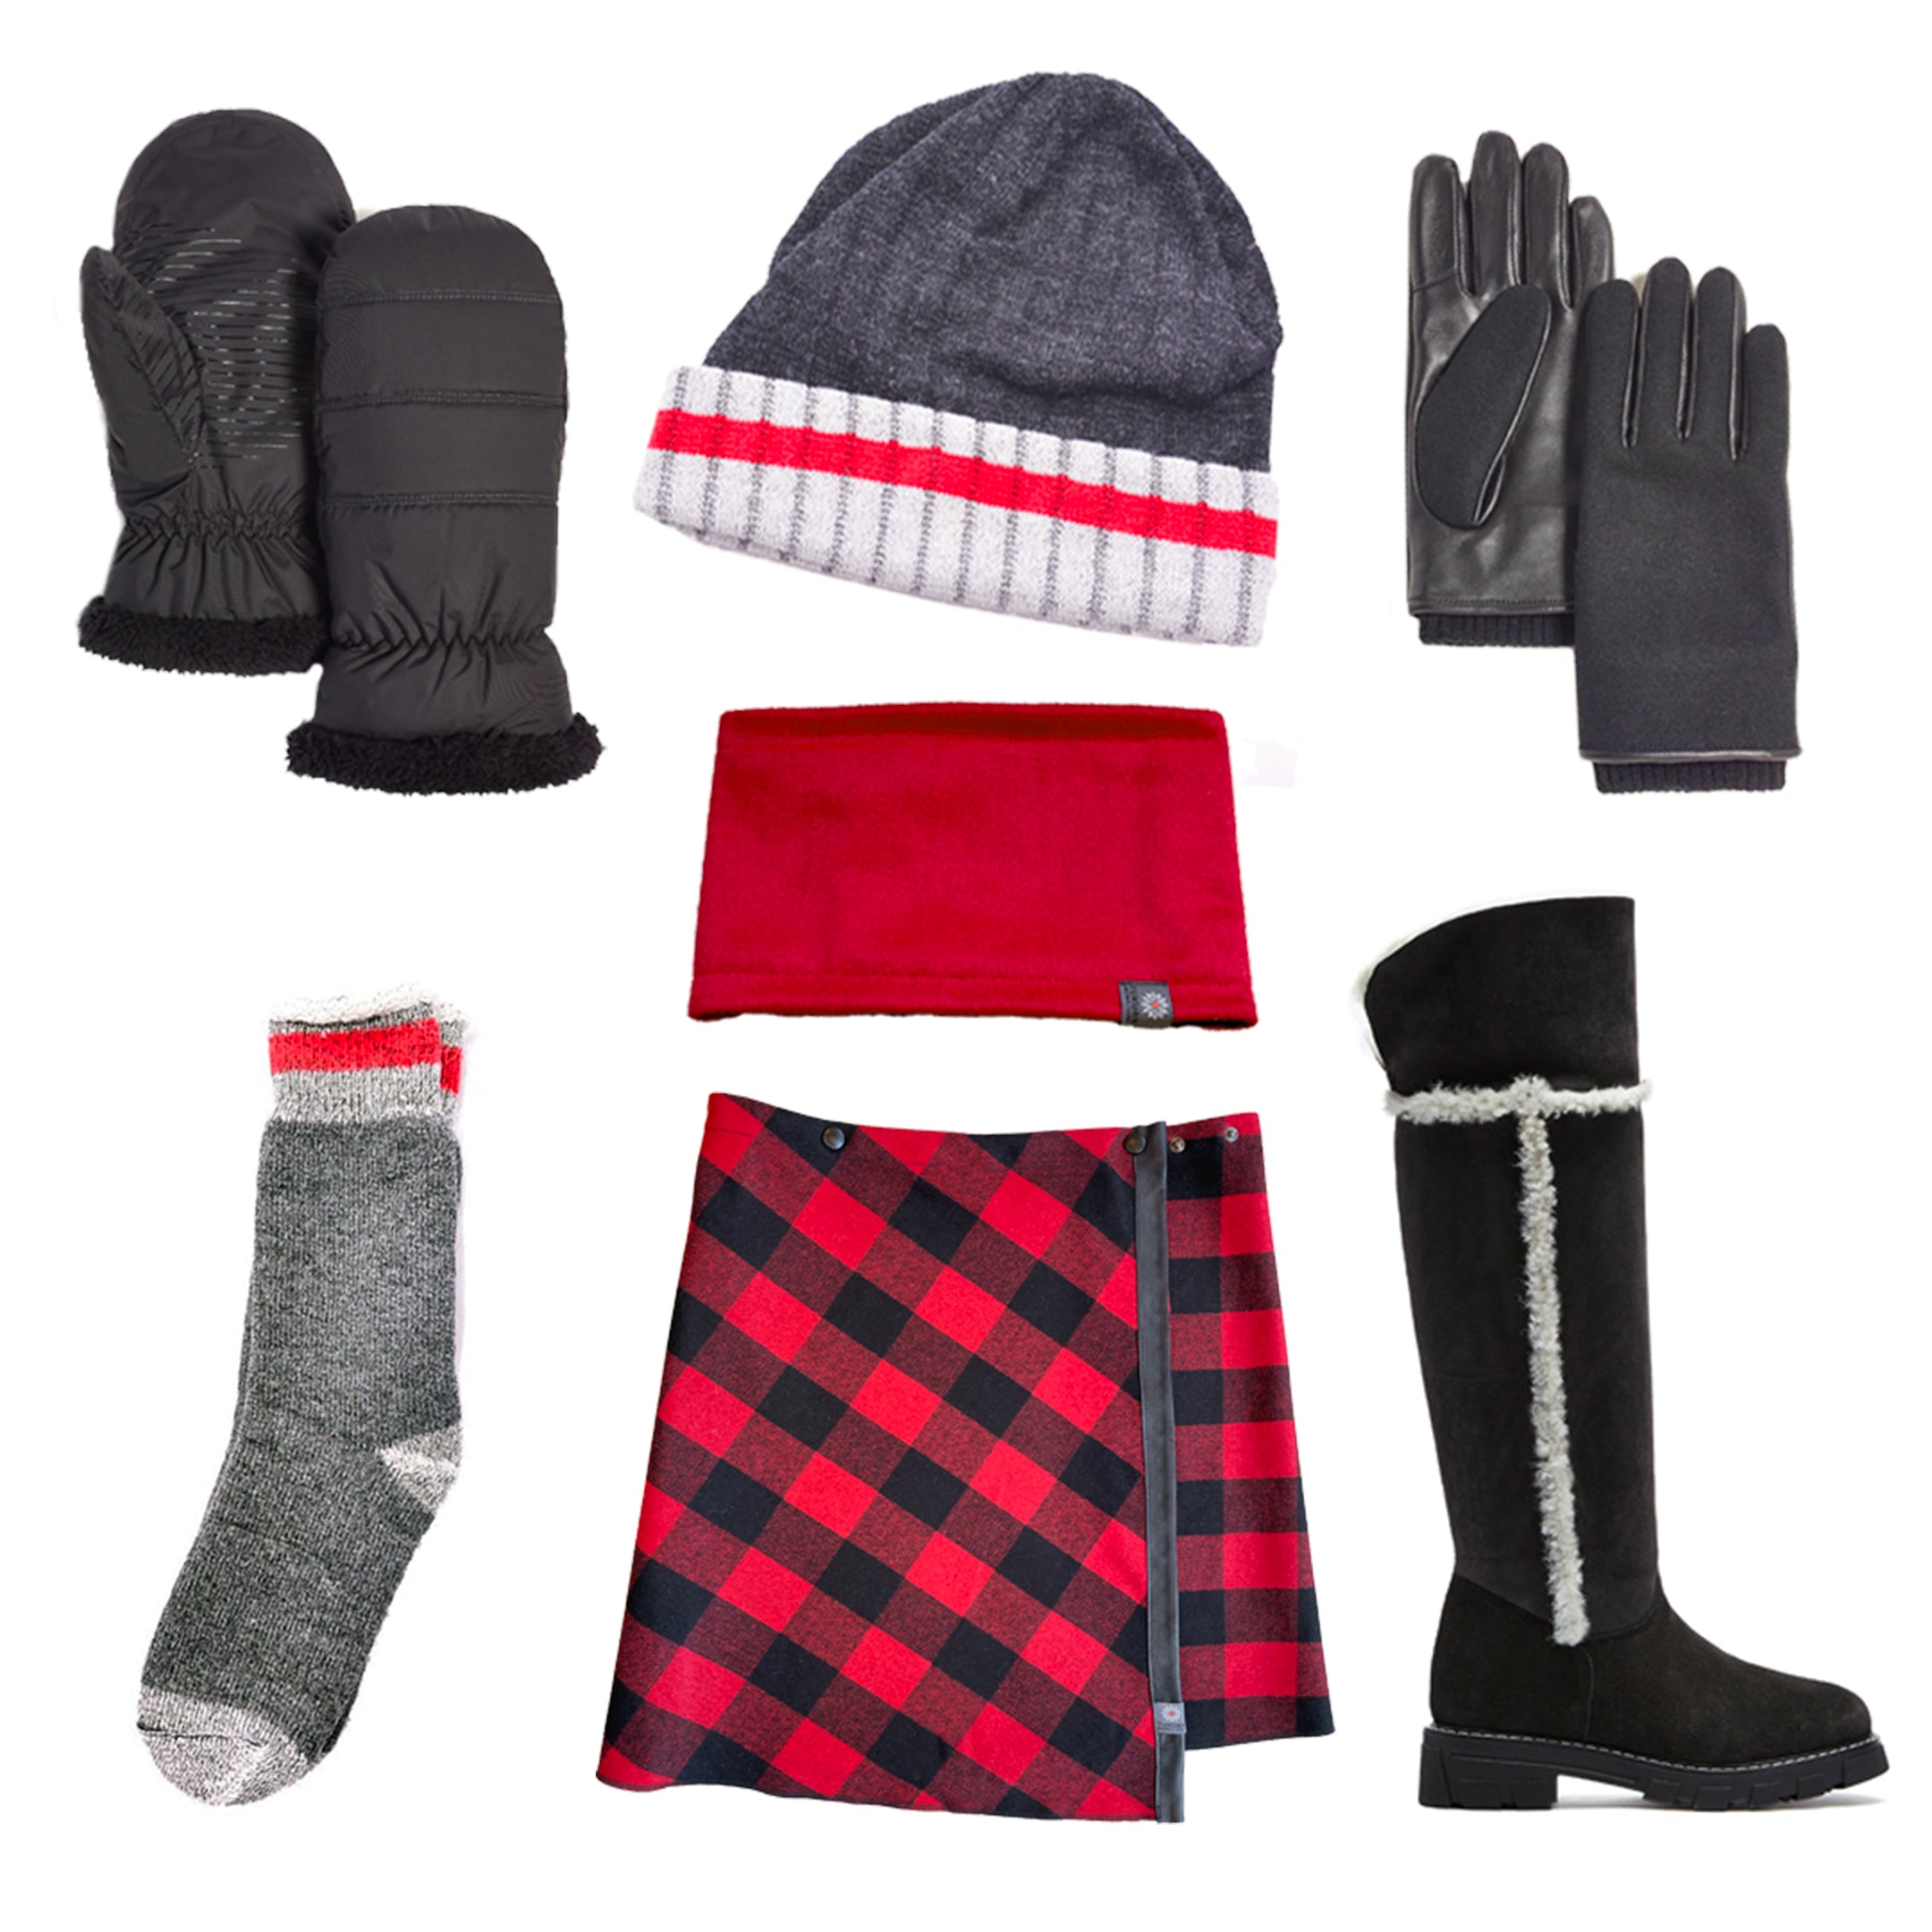 Newcomer guide: Essential armour to stay toasty in the Canadian